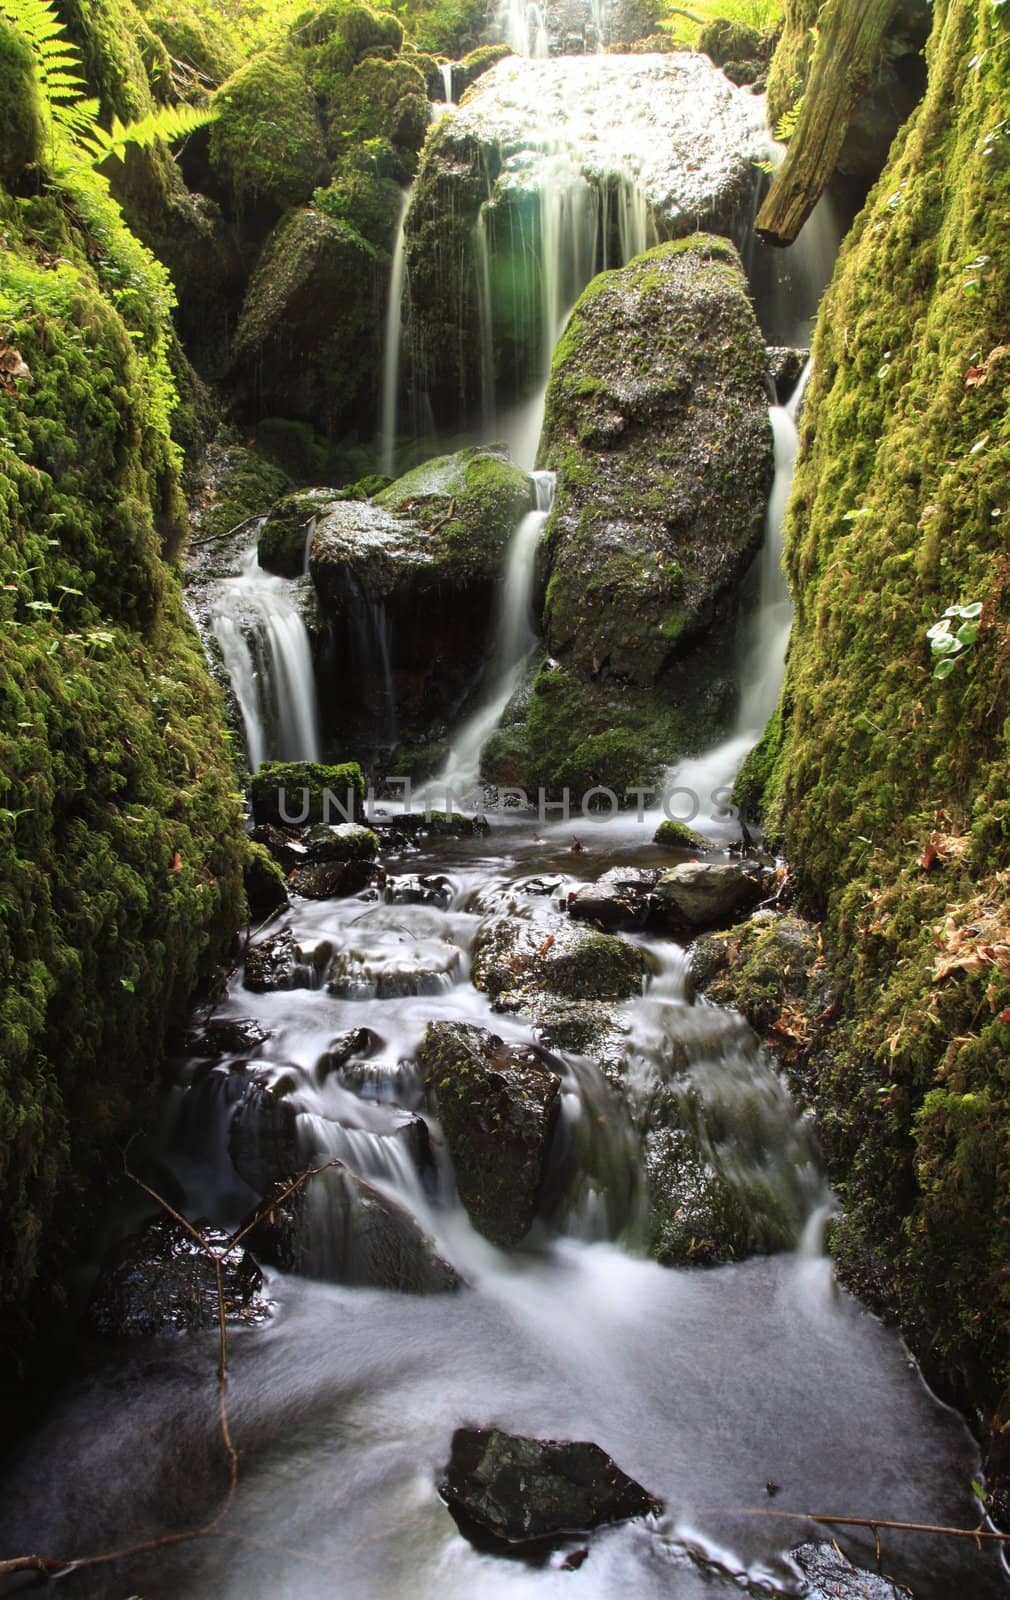 Water flowing down through rocks with moss 